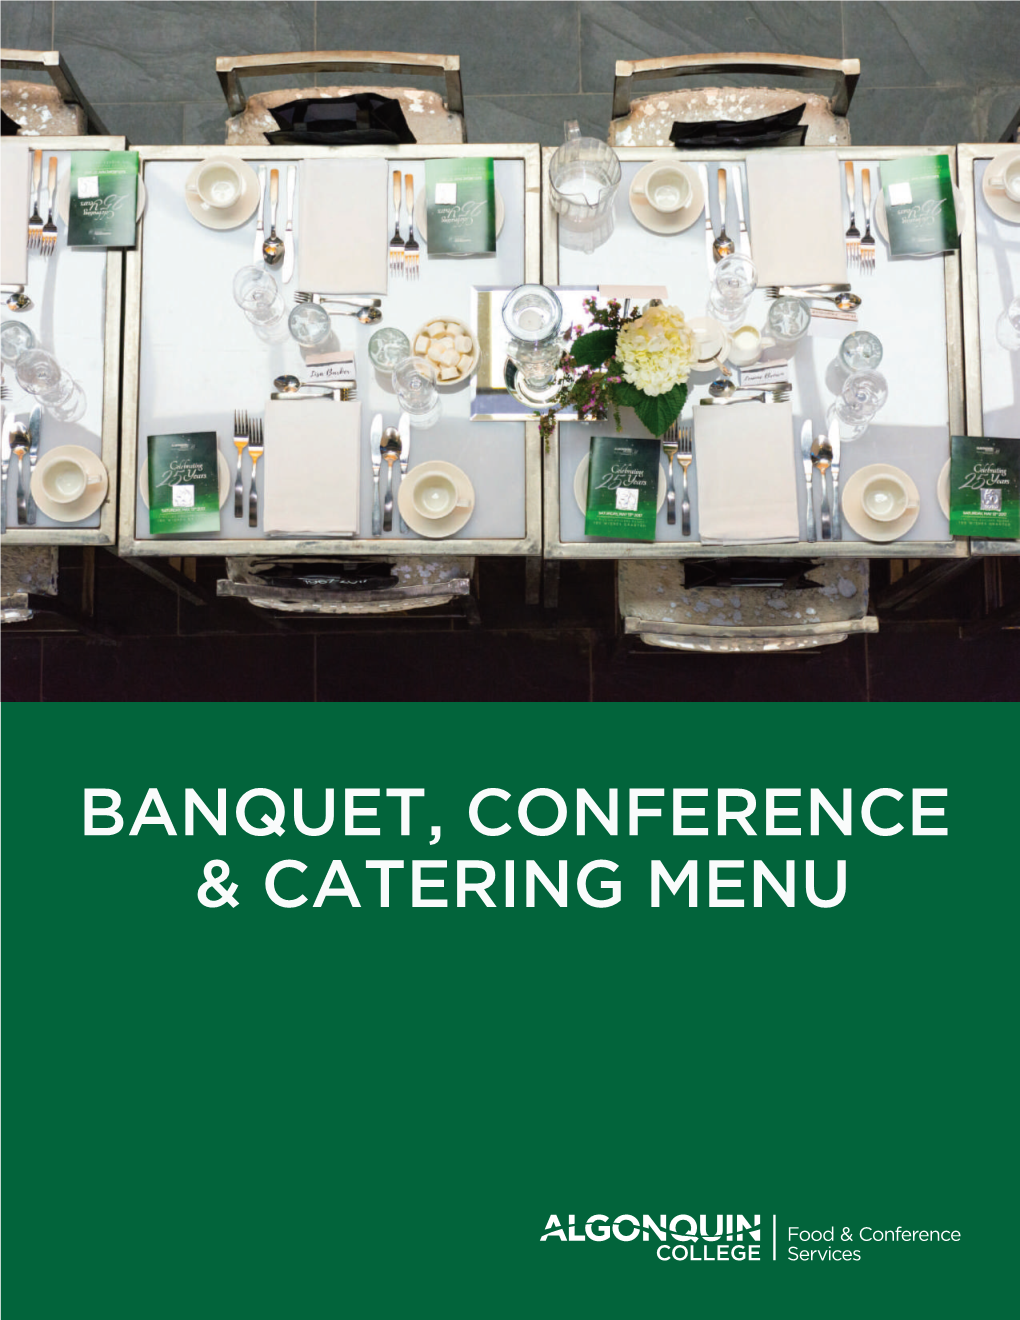 Banquet, Conference & Catering Menu